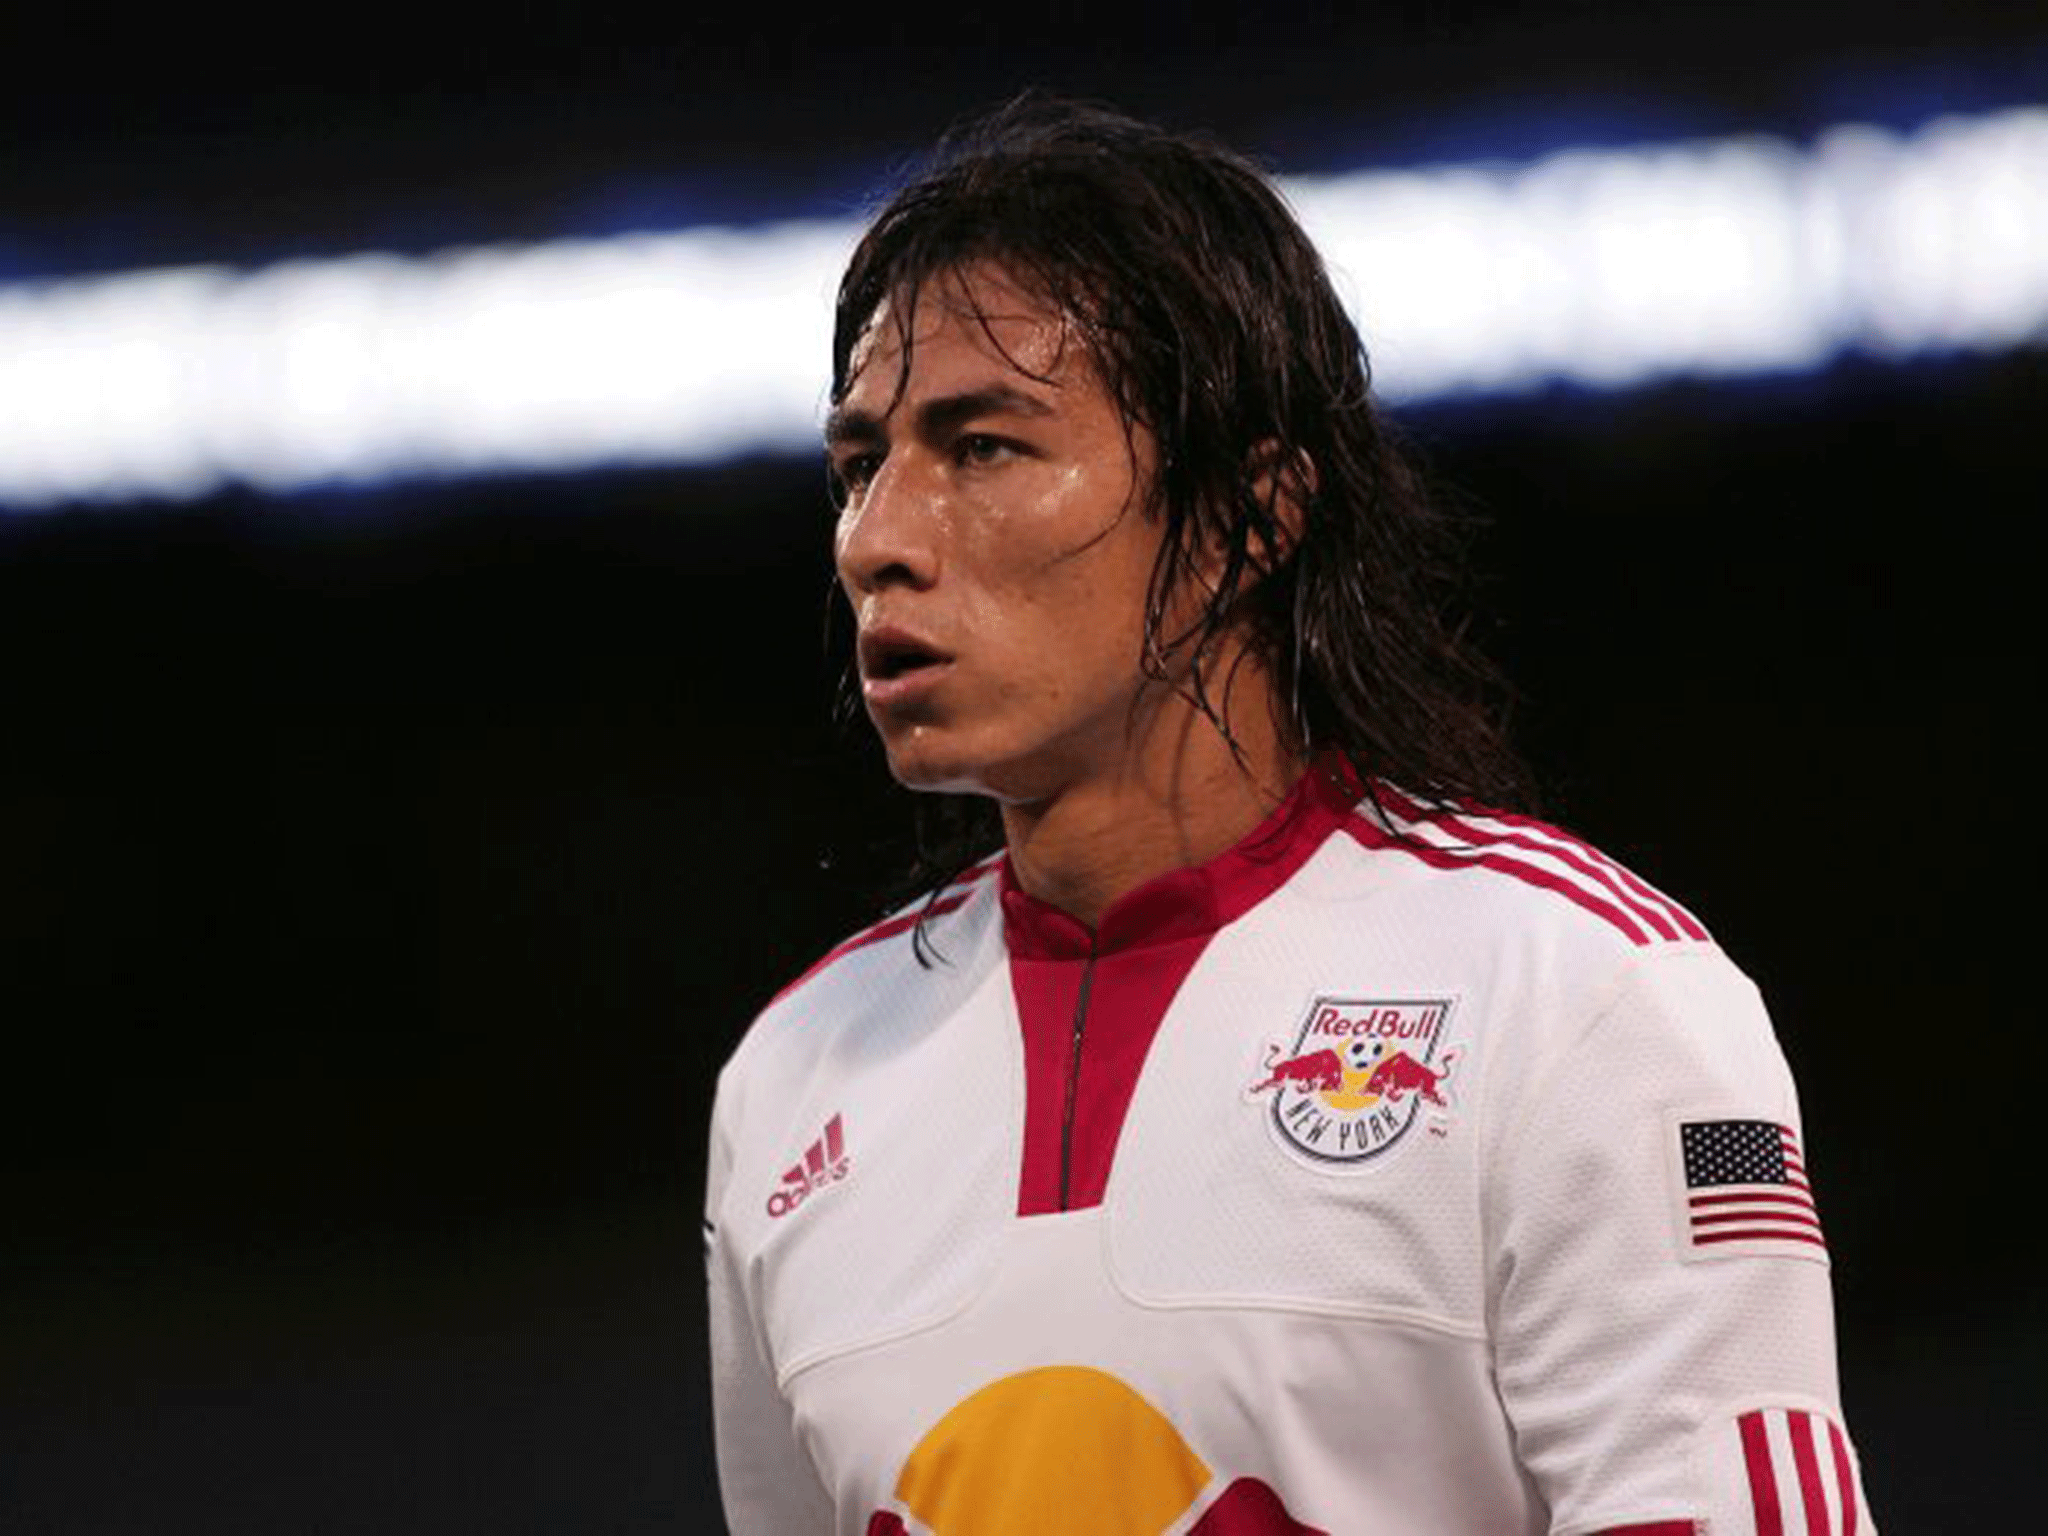 Alfredo Pacheco #16 of the New York Red Bulls plays the ball against the Houston Dynamo at Giants Stadium in the Meadowlands on May 16, 2009 in East Rutherford, New Jersey. Houston and New York play to a 1-1 Tie.